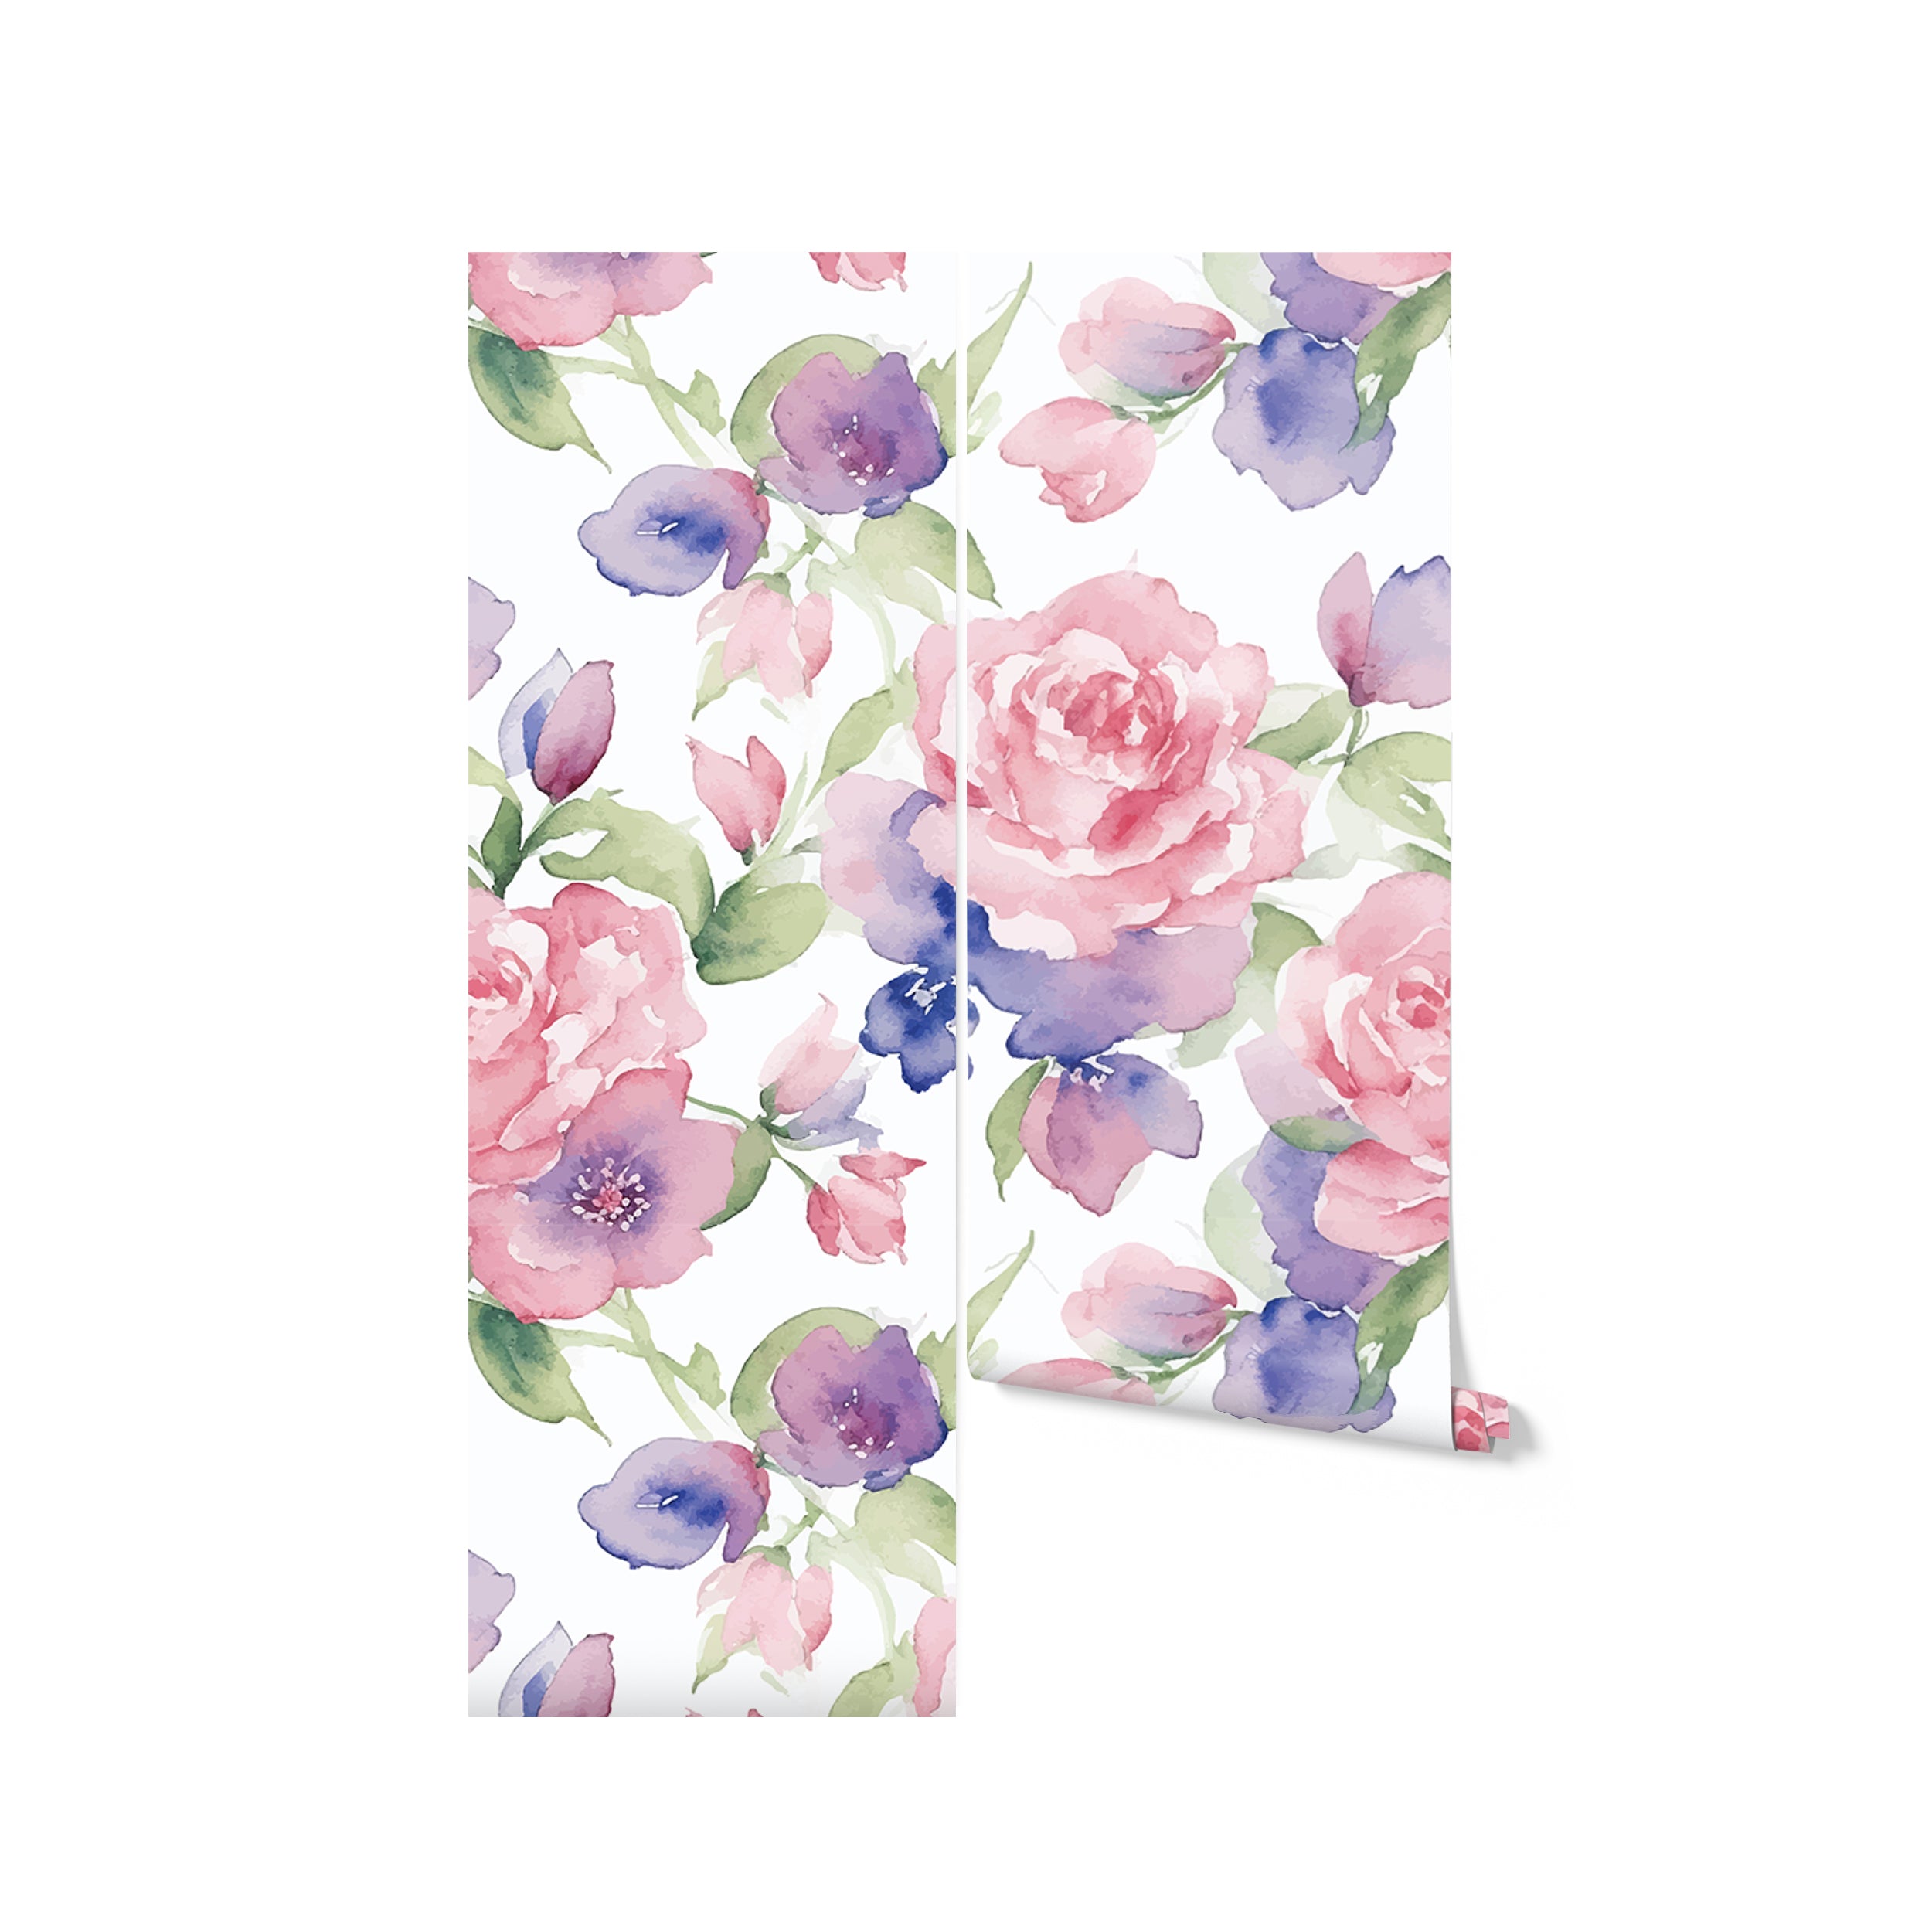 A digital image of a roll of Mystic Garden Wallpaper, illustrating the seamless flow of its floral design with pink roses and blue blossoms, perfect for adding a touch of nature's beauty and tranquility to any interior setting